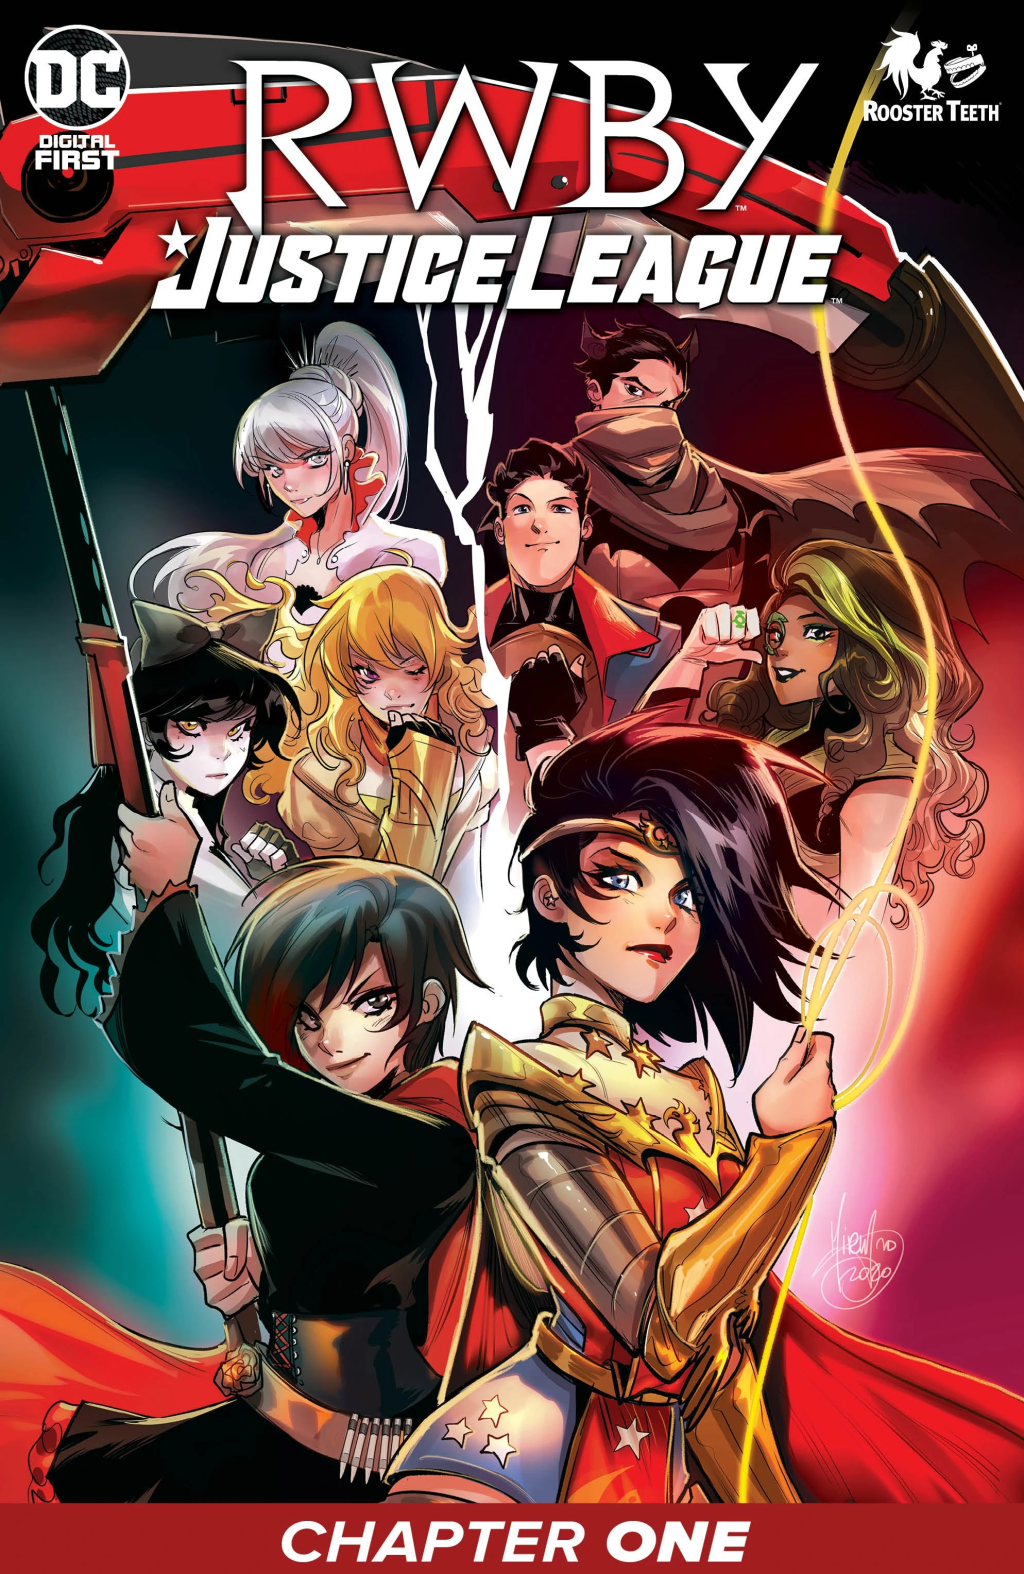 Batman, Superman, Jessica Cruz, Wonder Woman, Ruby, Yang, Blake, and Weiss on Mirka Andolfo's cover to RWBY/Justice League Vol. 1 #1 "The Farm Boy From Out of This World" (2021), DC